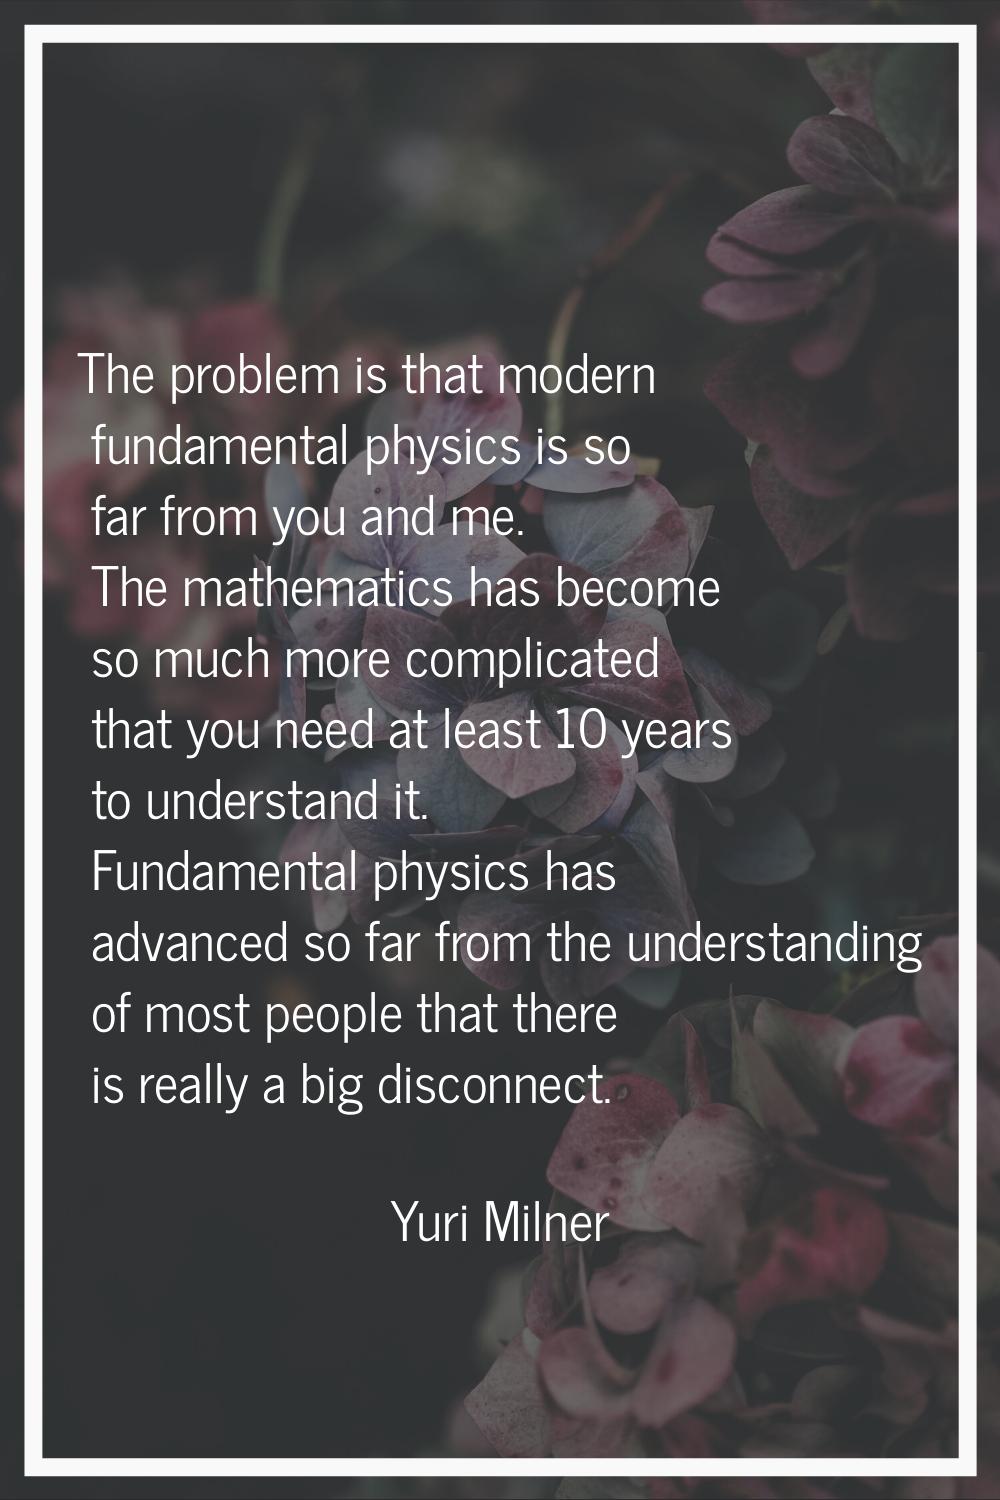 The problem is that modern fundamental physics is so far from you and me. The mathematics has becom